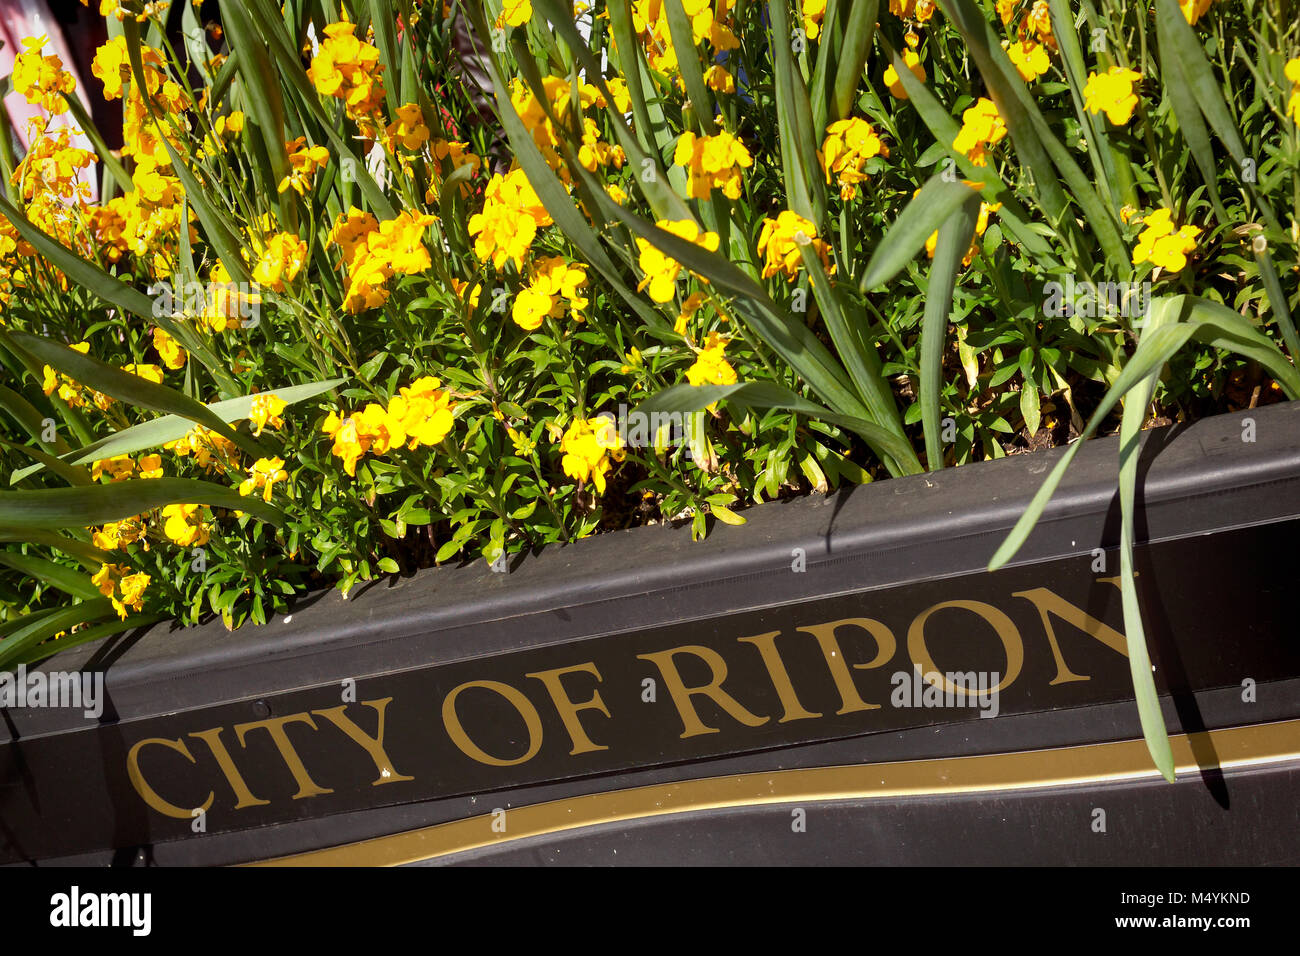 City of Ripon sign planted with yellow wallflowers Stock Photo